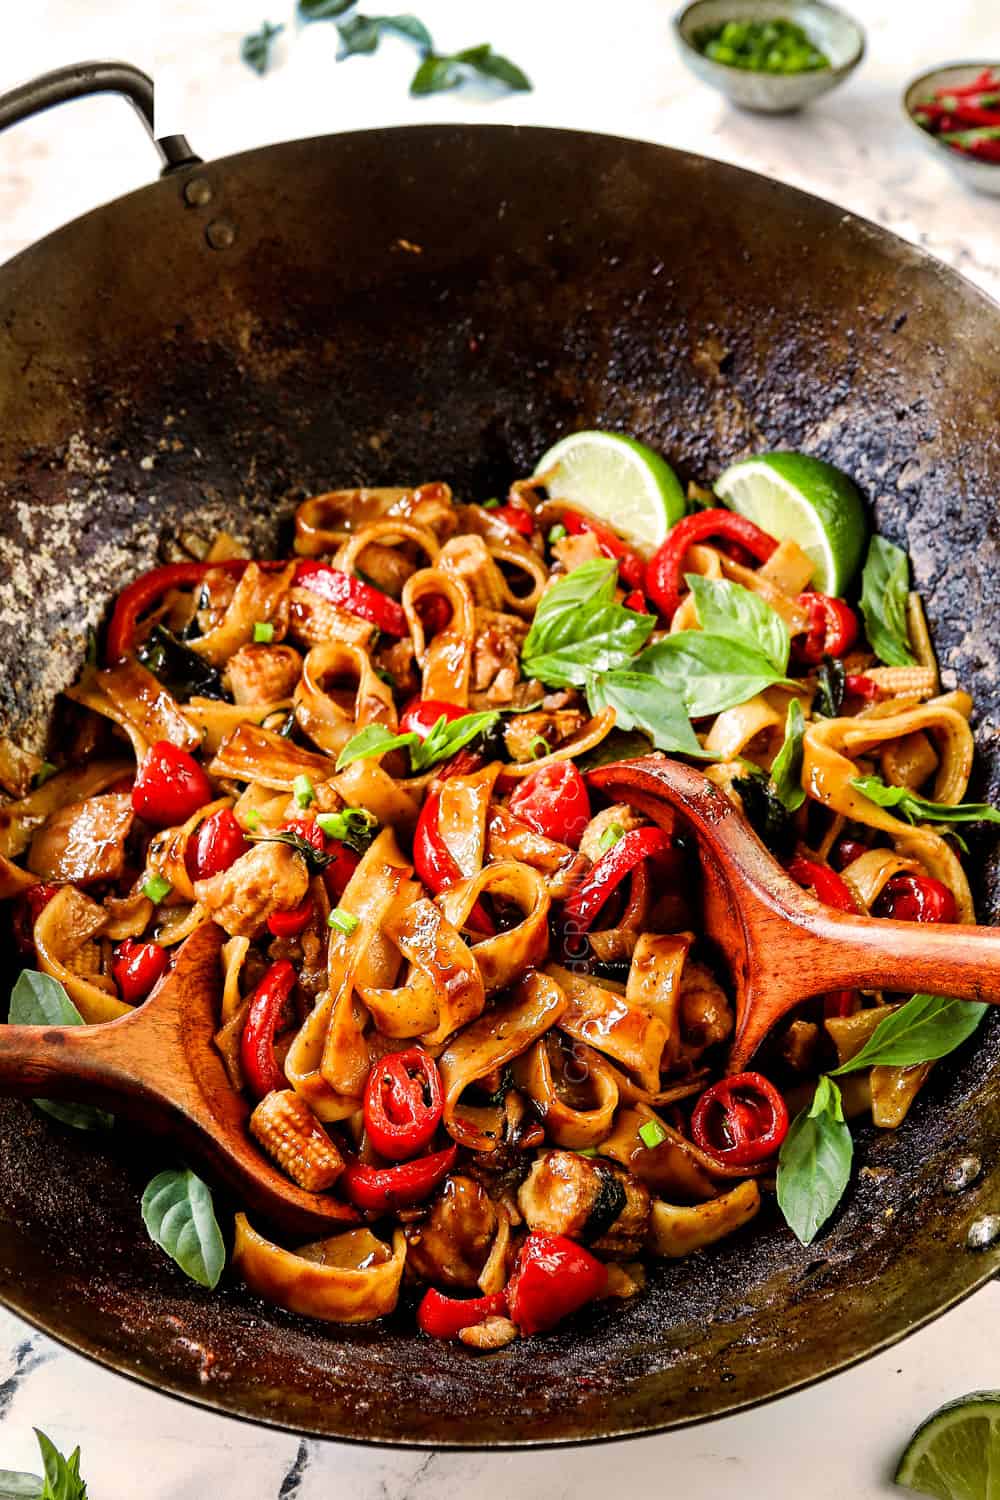 Drunken Noodles (Pad Kee Mao) recipe in a wok with wide rice noodles and chicken